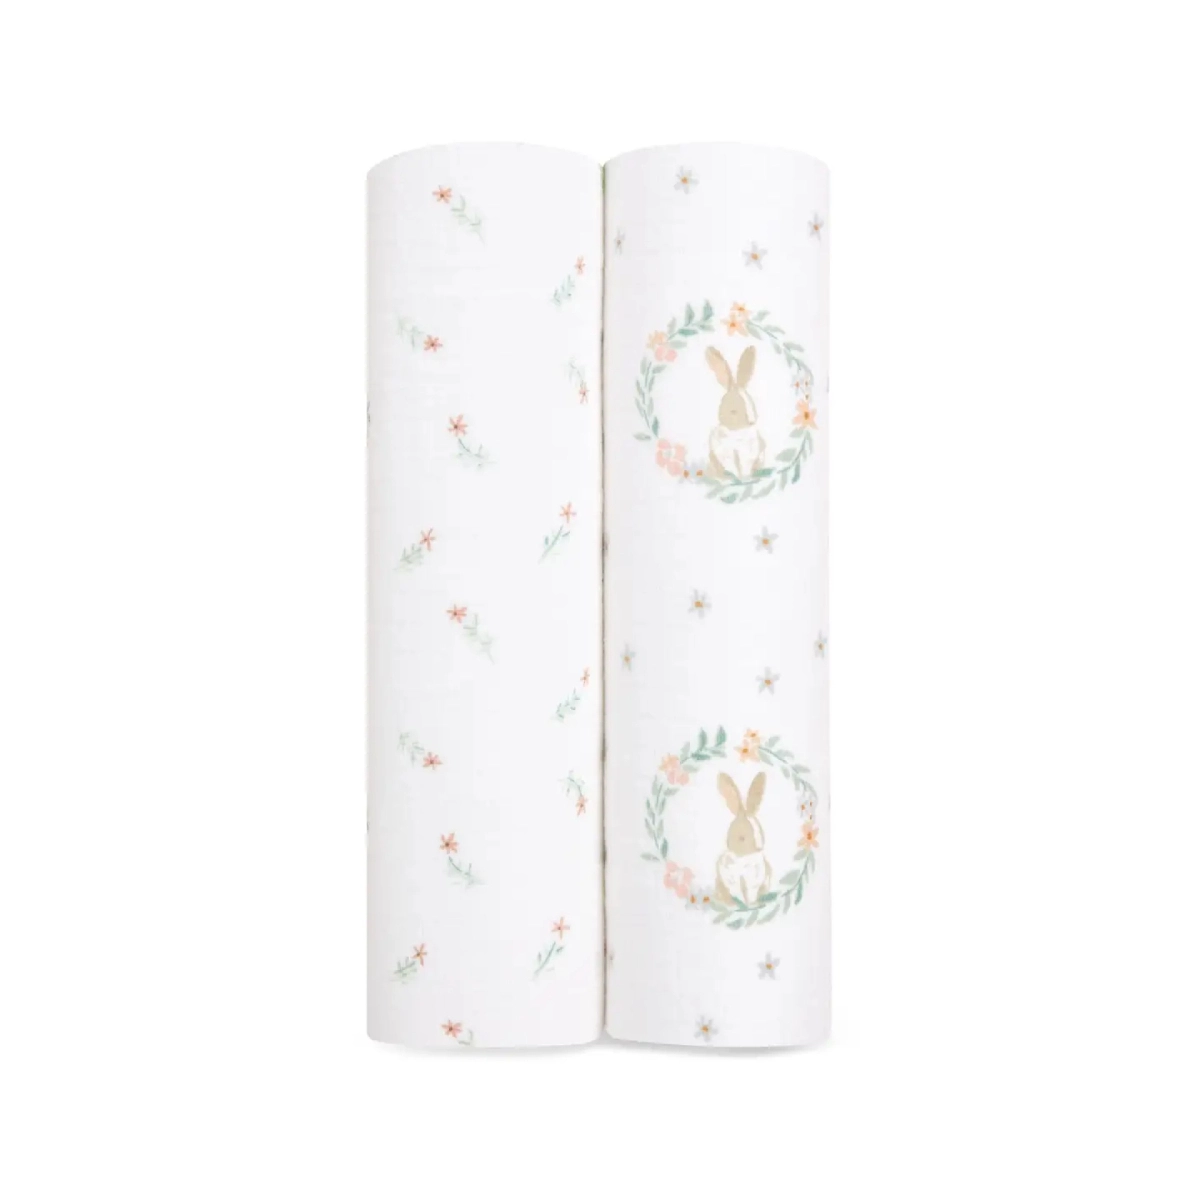 Image of Aden + Anais Pack of 2 Essentials Cotton Muslin Swaddle Blanket - Blushing Bunnies (23-19-257)